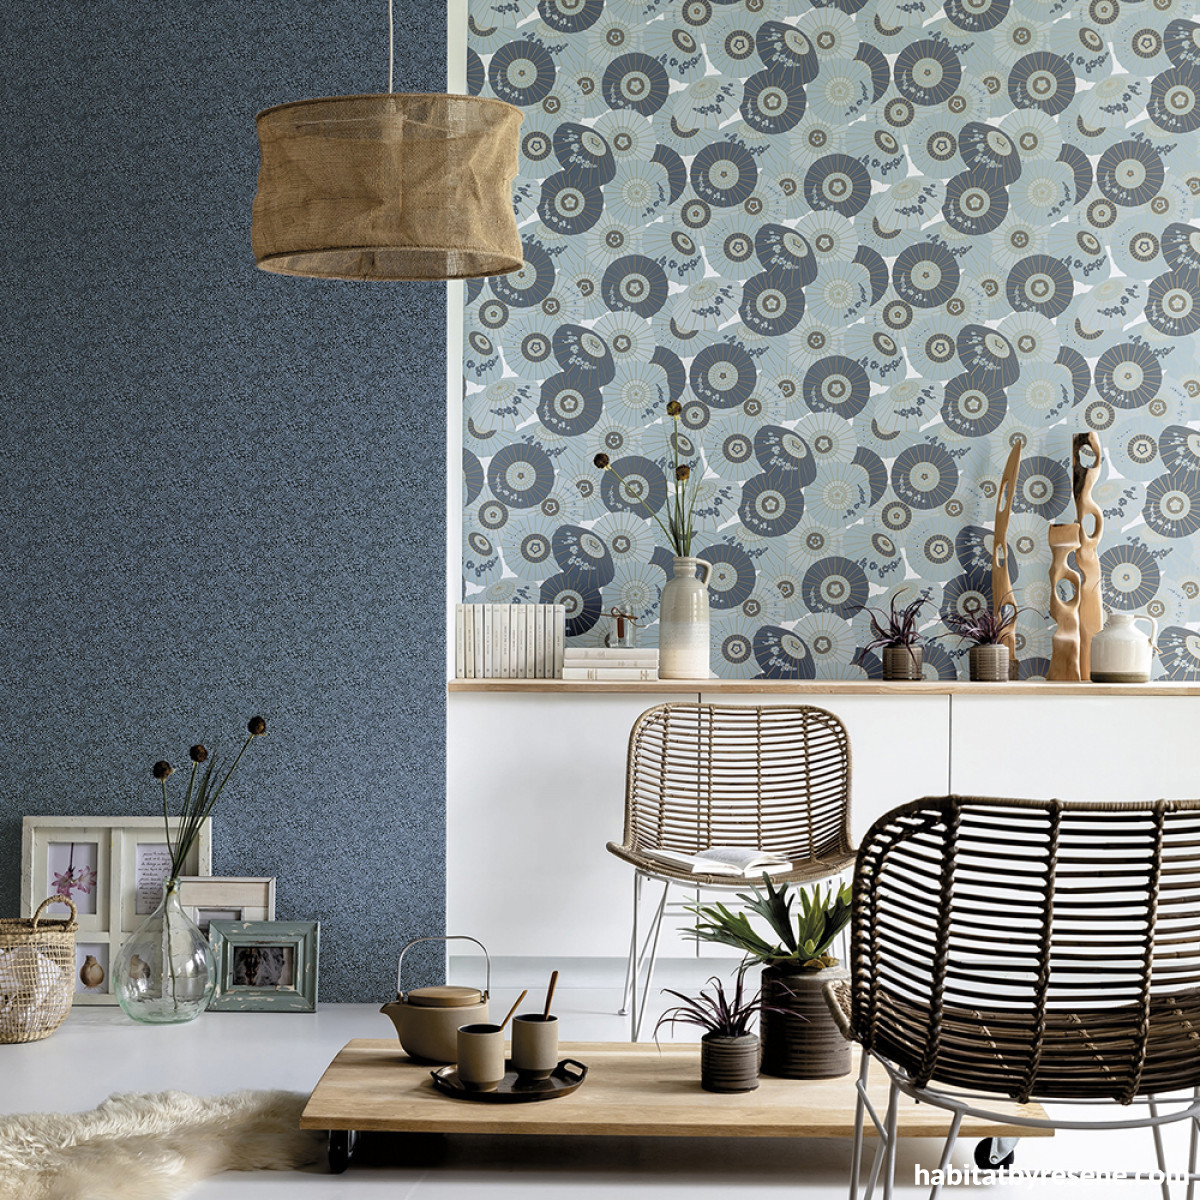 Hero blue with these dreamy wallpaper designs | Habitat by Resene